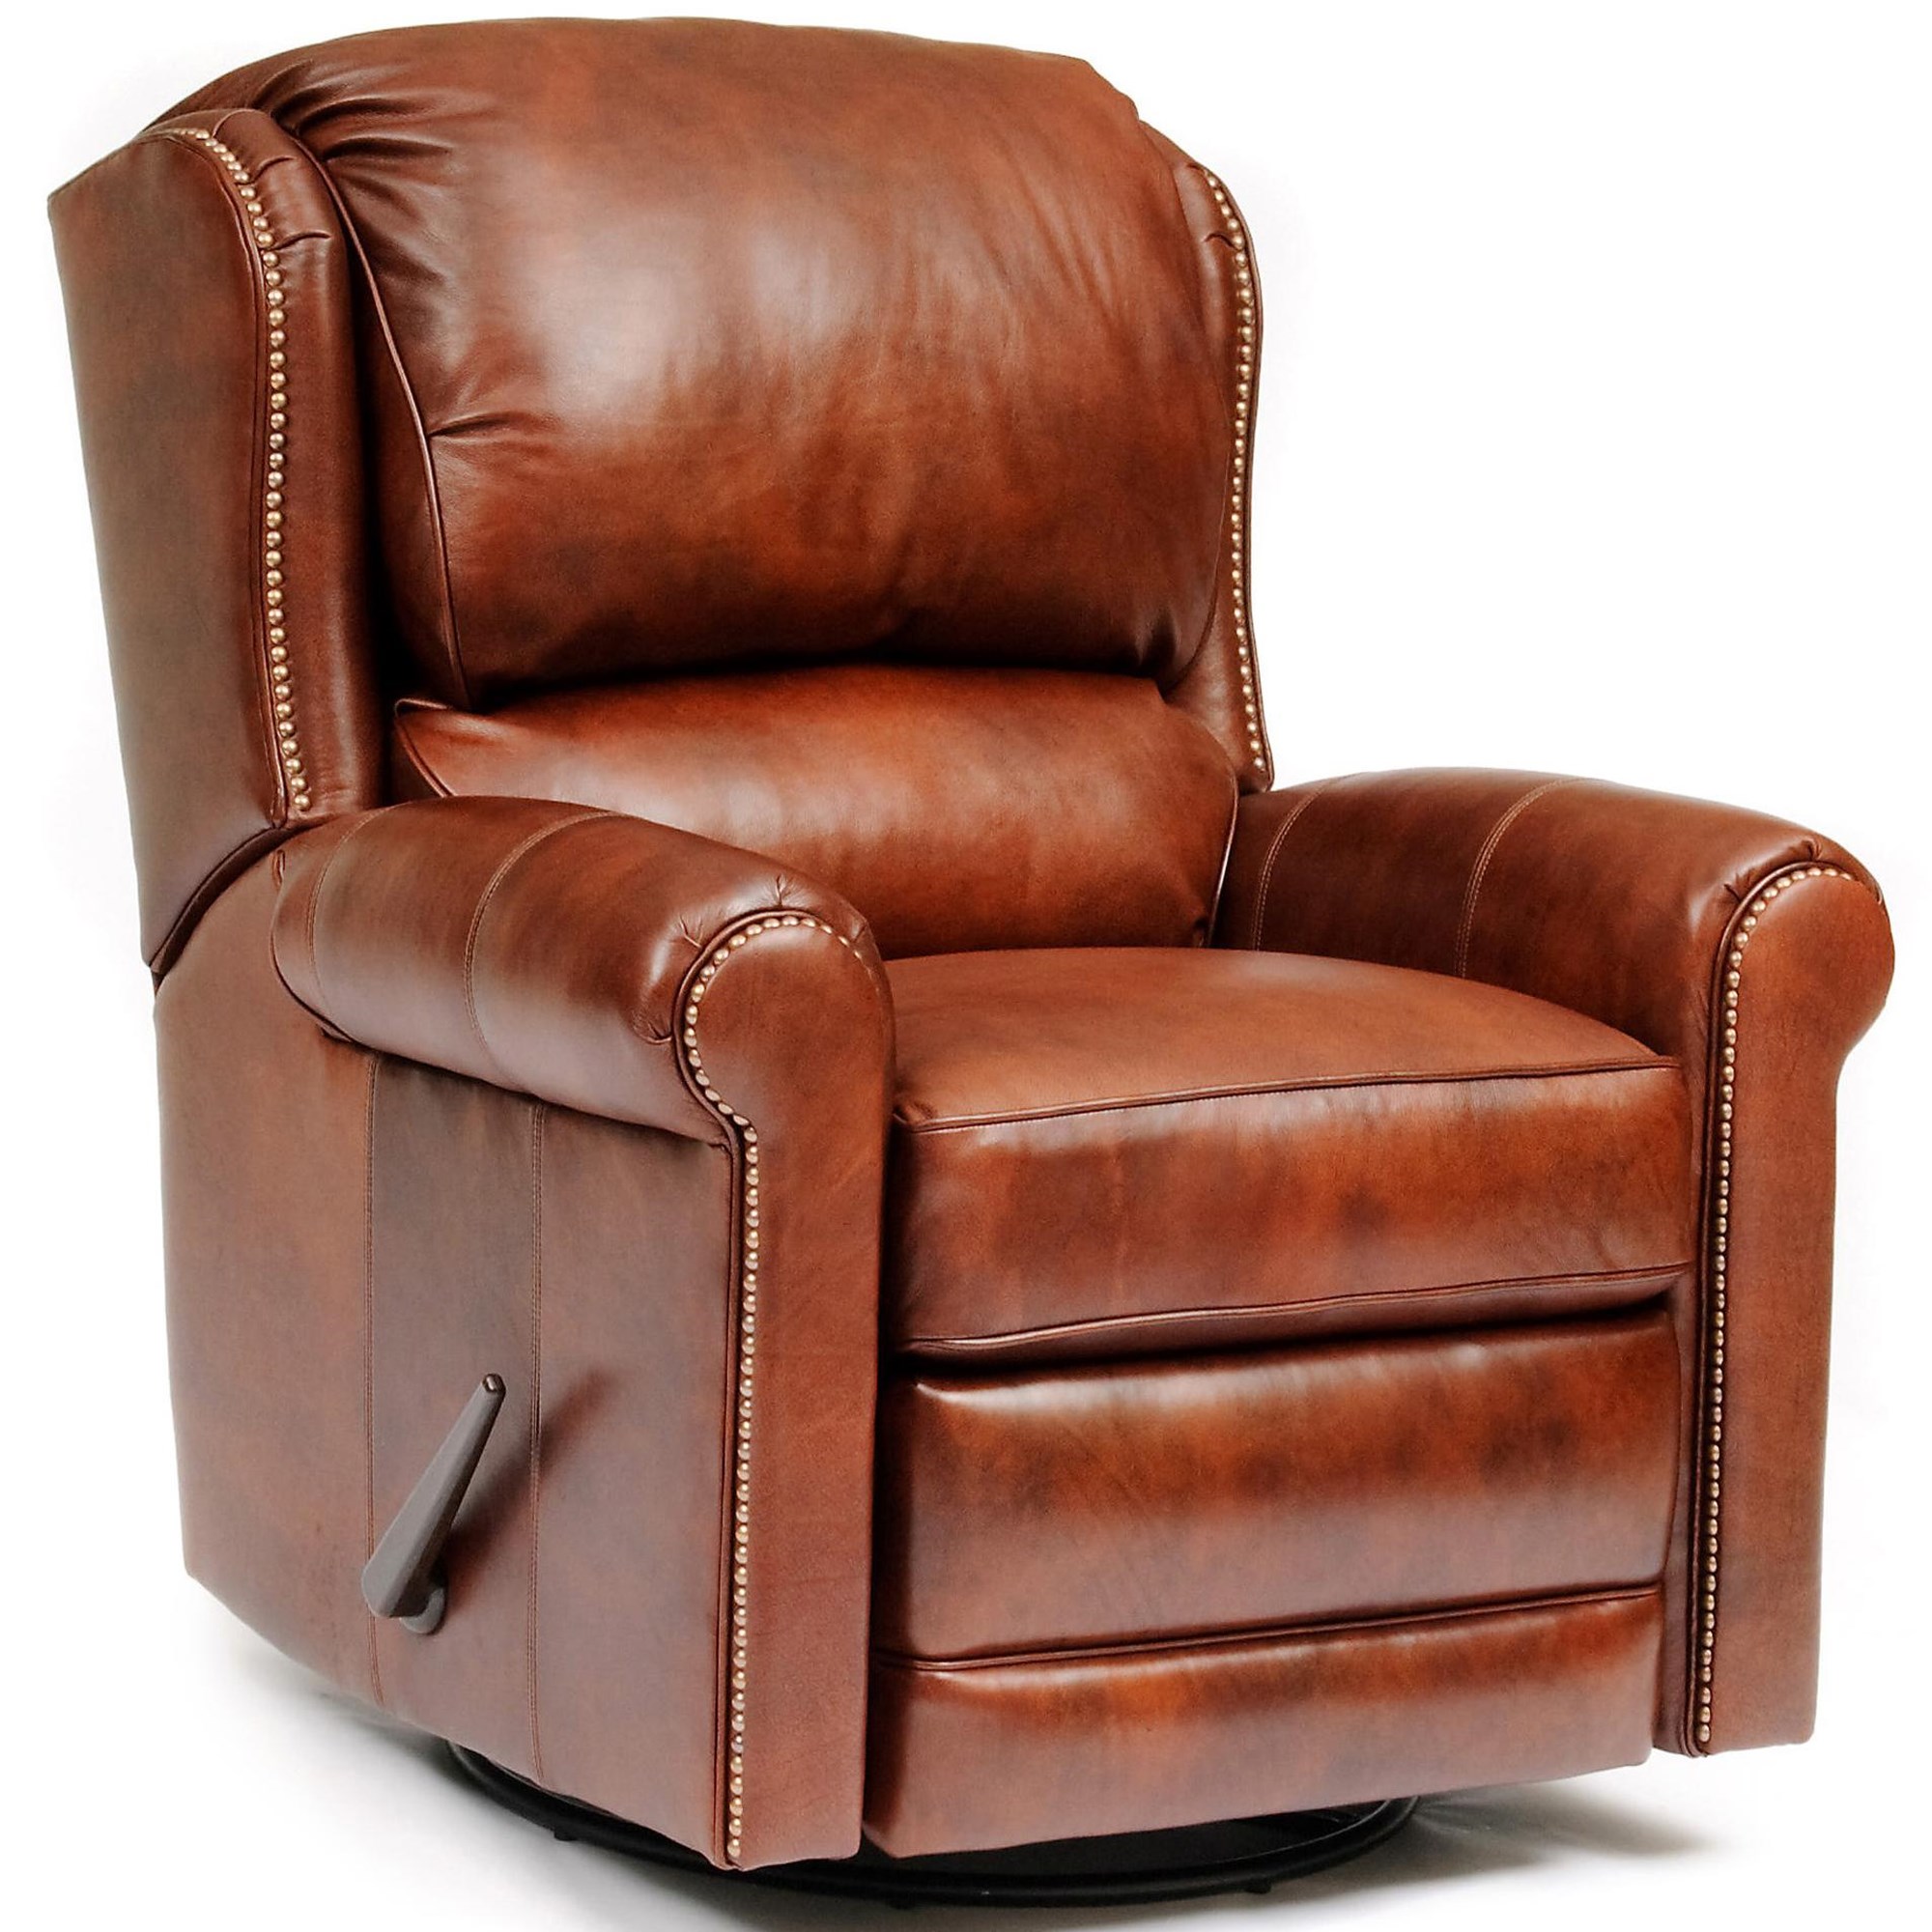 Smith Brothers 720L 000720598818 Casual Leather Swivel Glider Reclining  Chair | Weinberger's Furniture | Recliner - Three Way